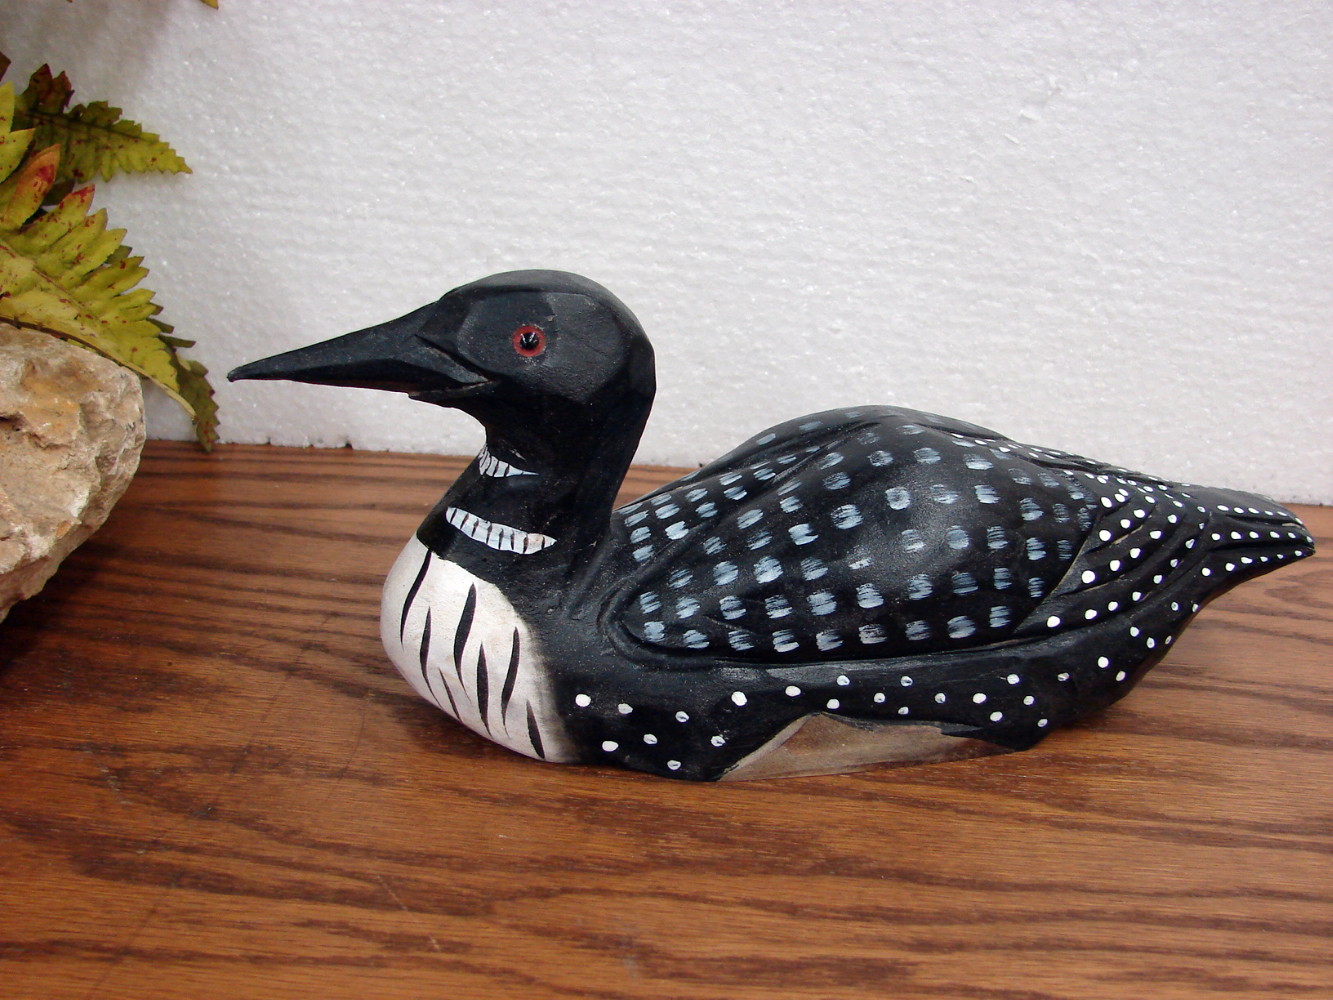 Wood Carved Common Loon Decoy Figurine